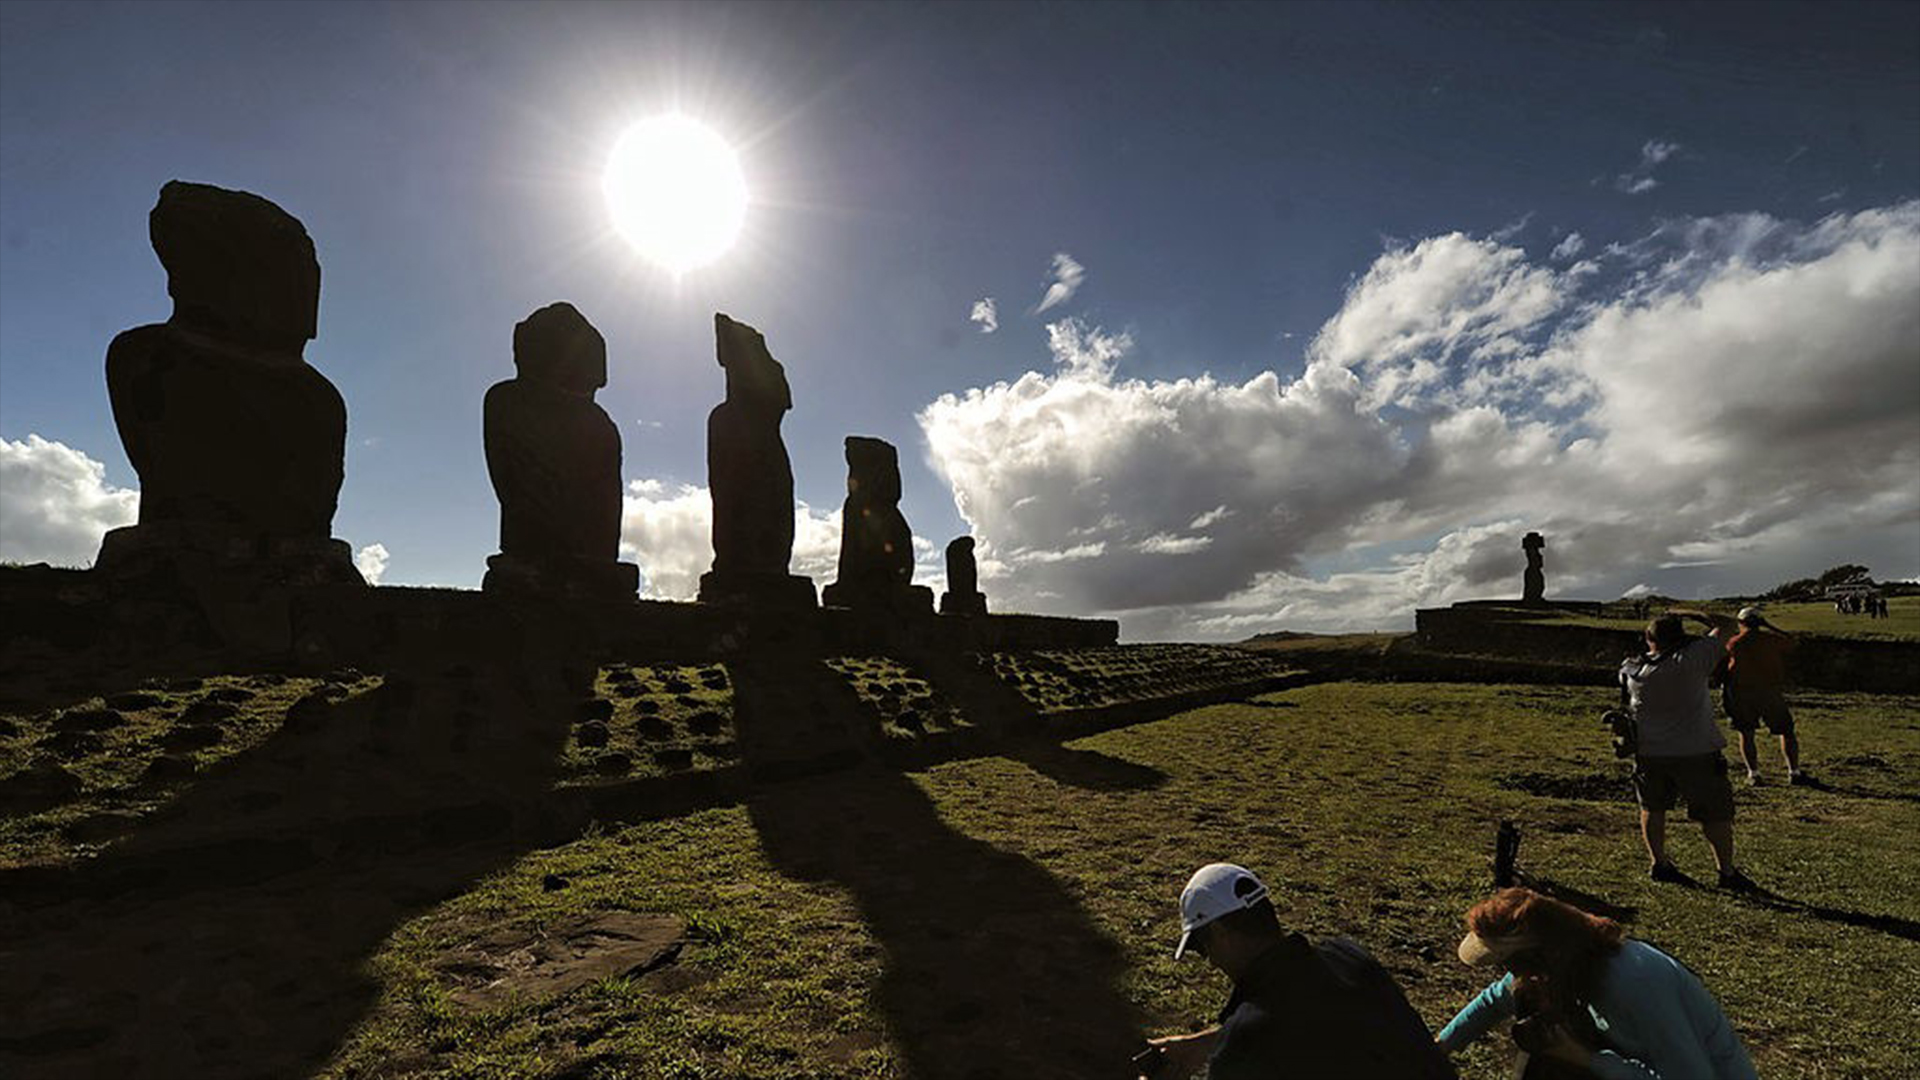 A total solar eclipse was visible from Rapa Nui/Easter Island in 2010.